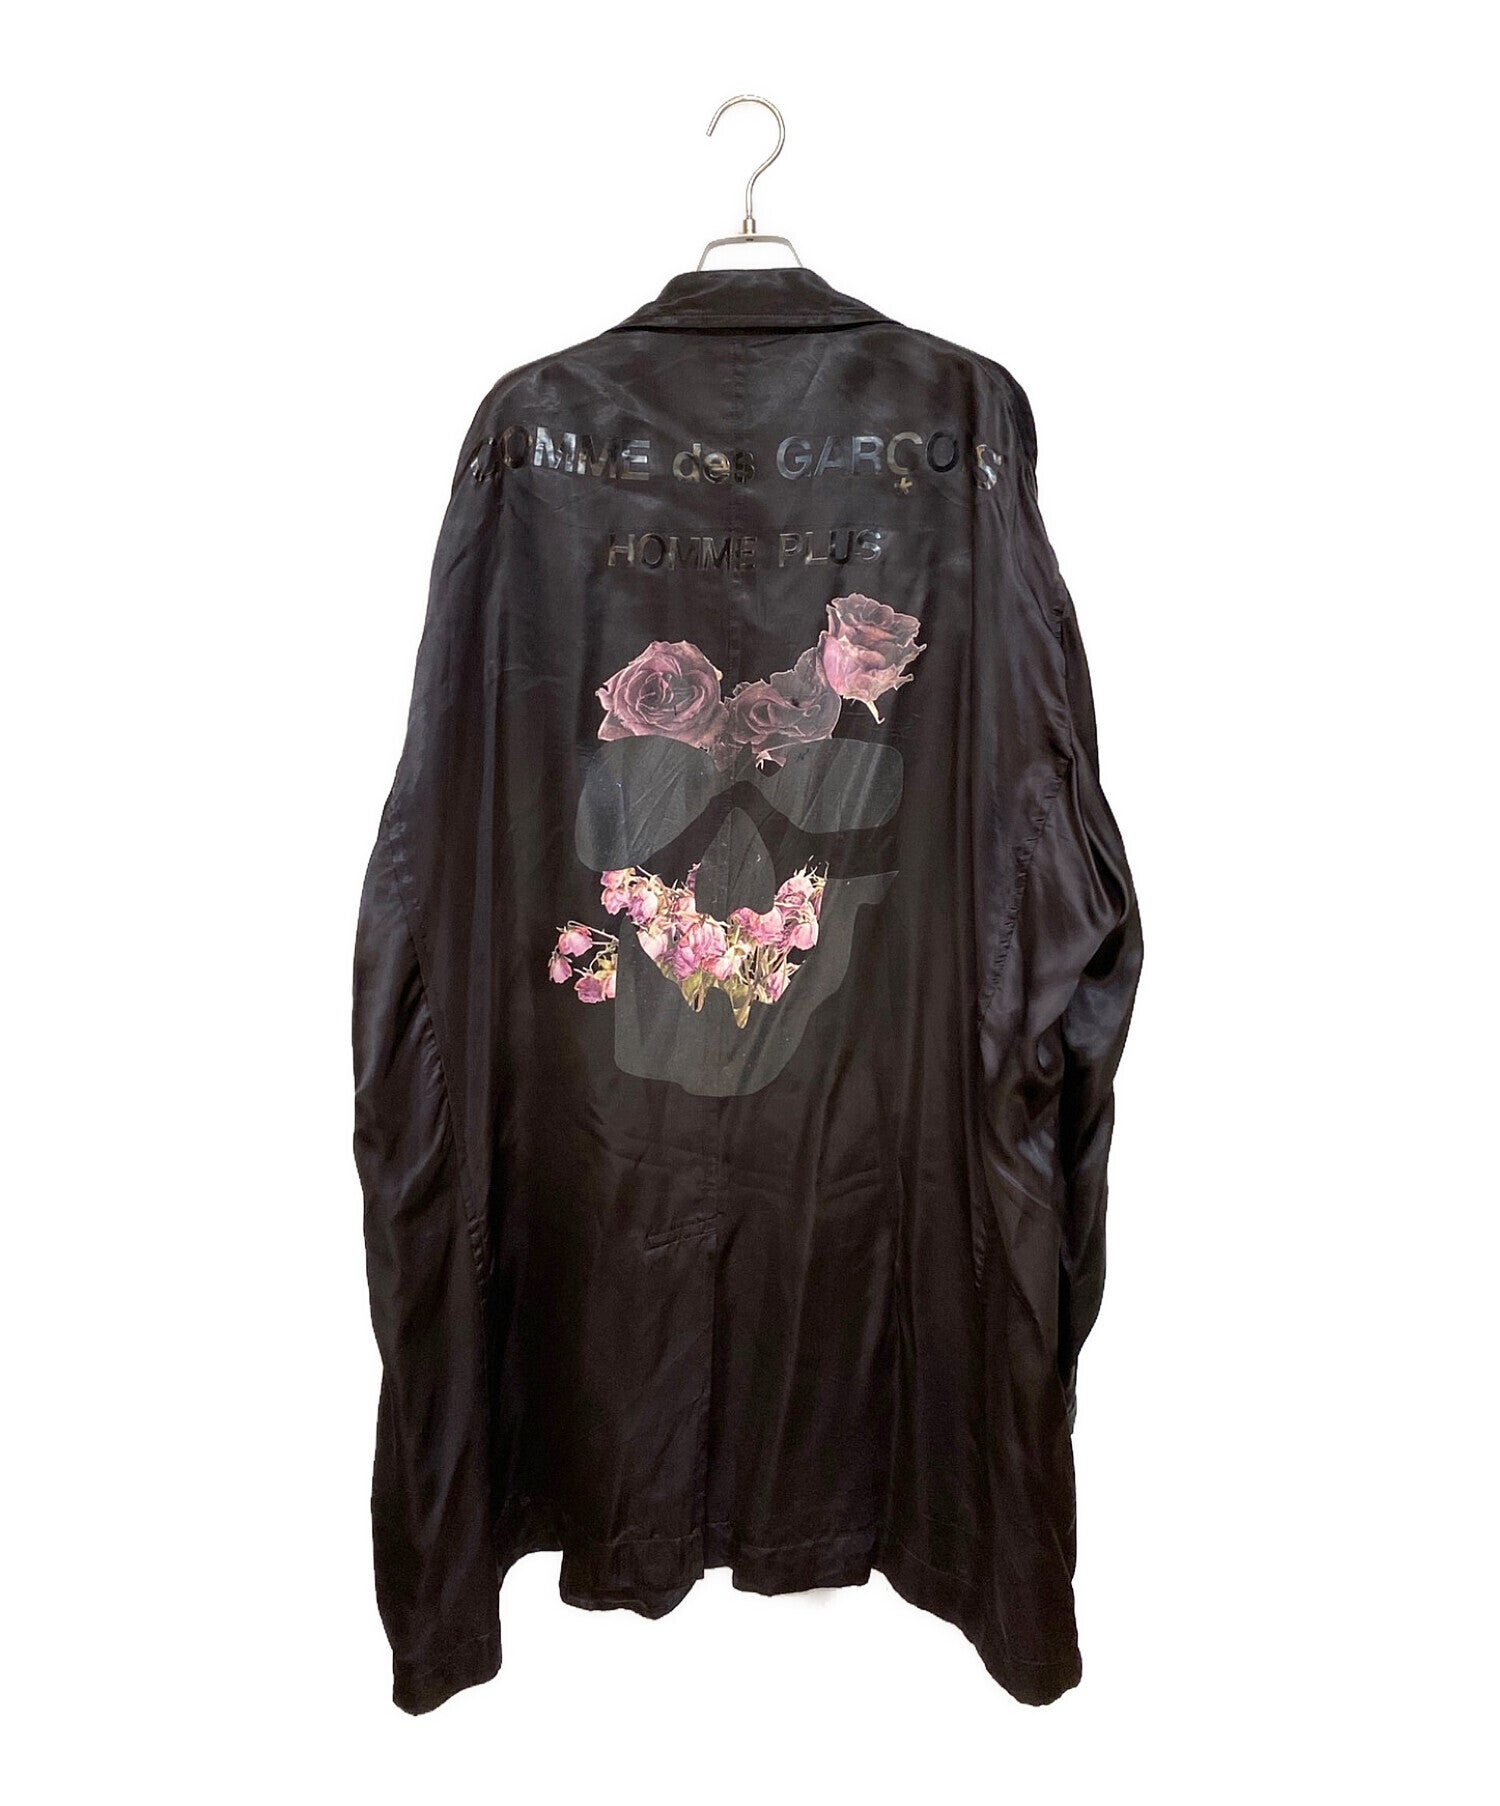 Pre-owned] COMME des GARCONS HOMME PLUS 22SS Flower Existence 